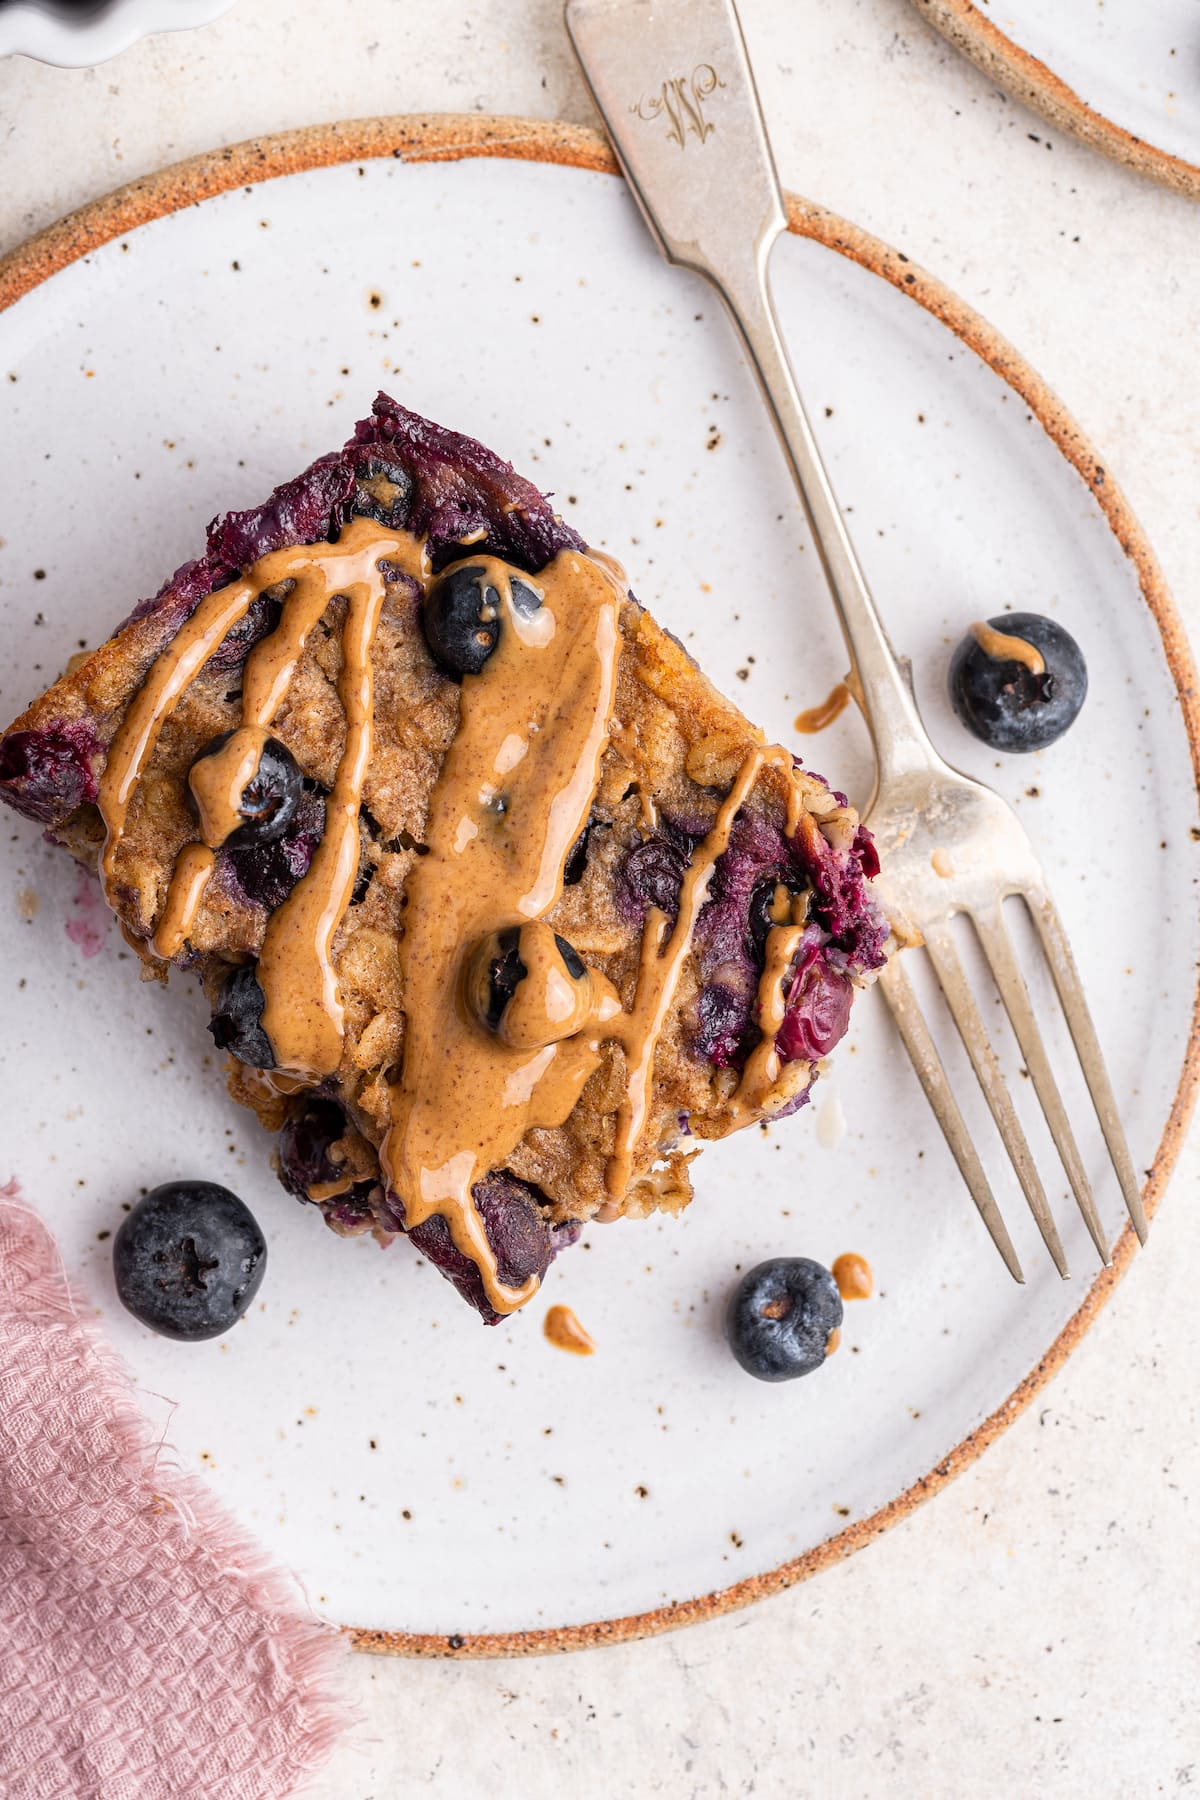 A serving of blueberry baked oatmeal on a small plate with a metal fork. The square piece of baked oatmeal has a drizzle of nut butter on top.